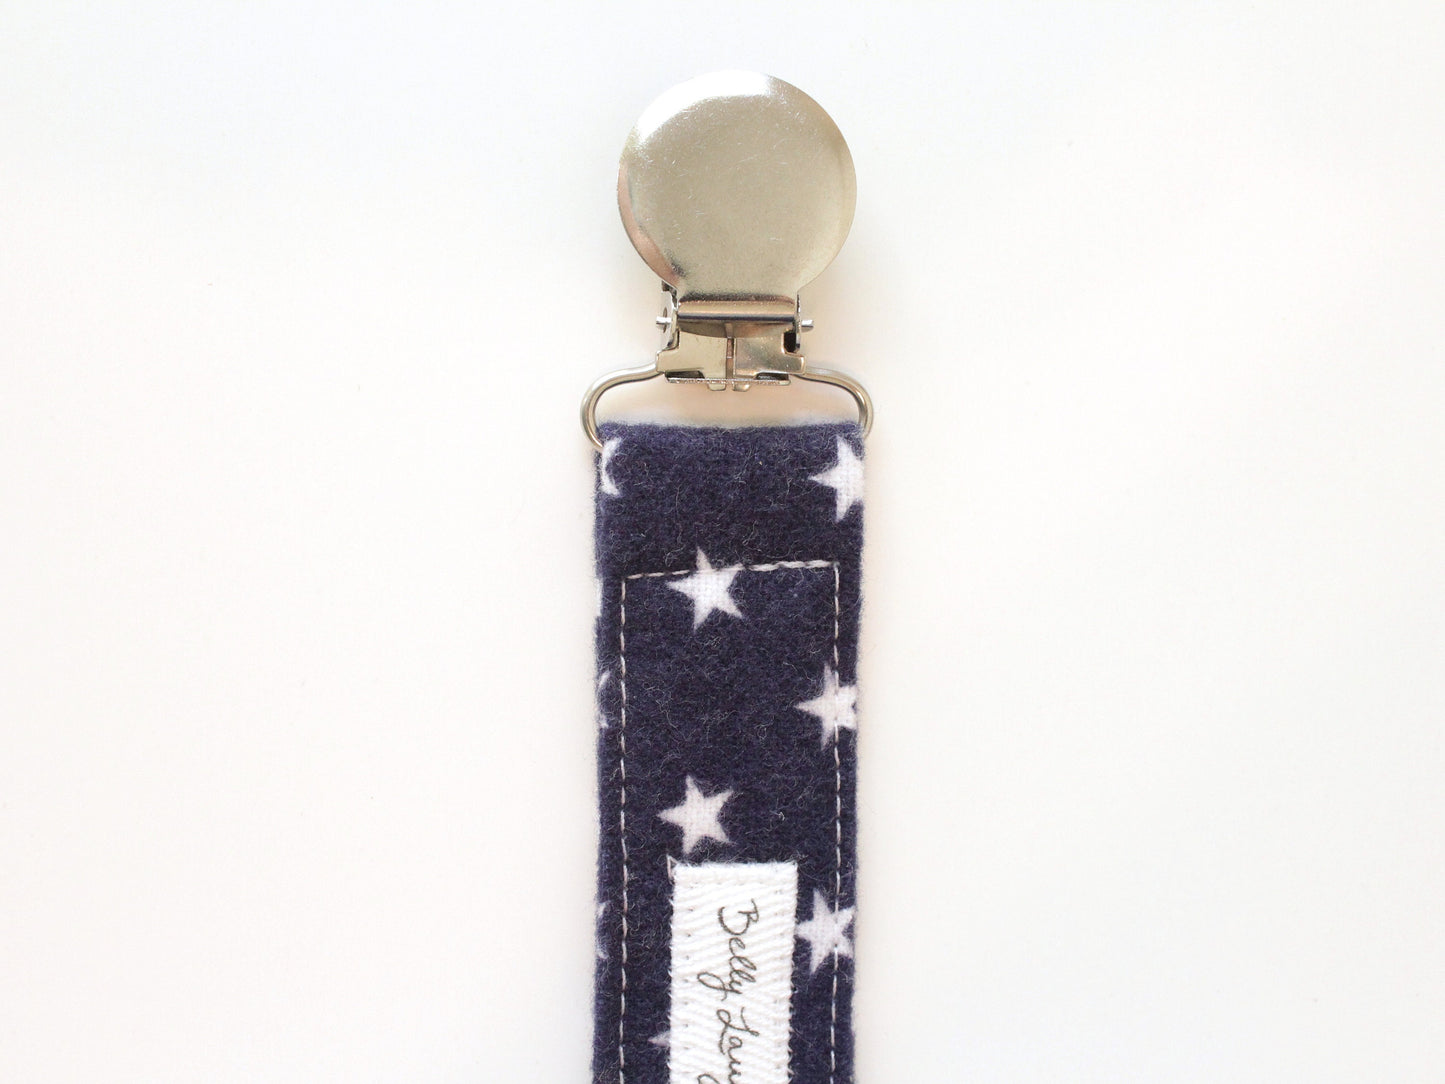 Blue Stars Flannel Pacifier Clip Gender Neutral | Baby Gift | Soother Leash Binky Holder | CPSC Compliant